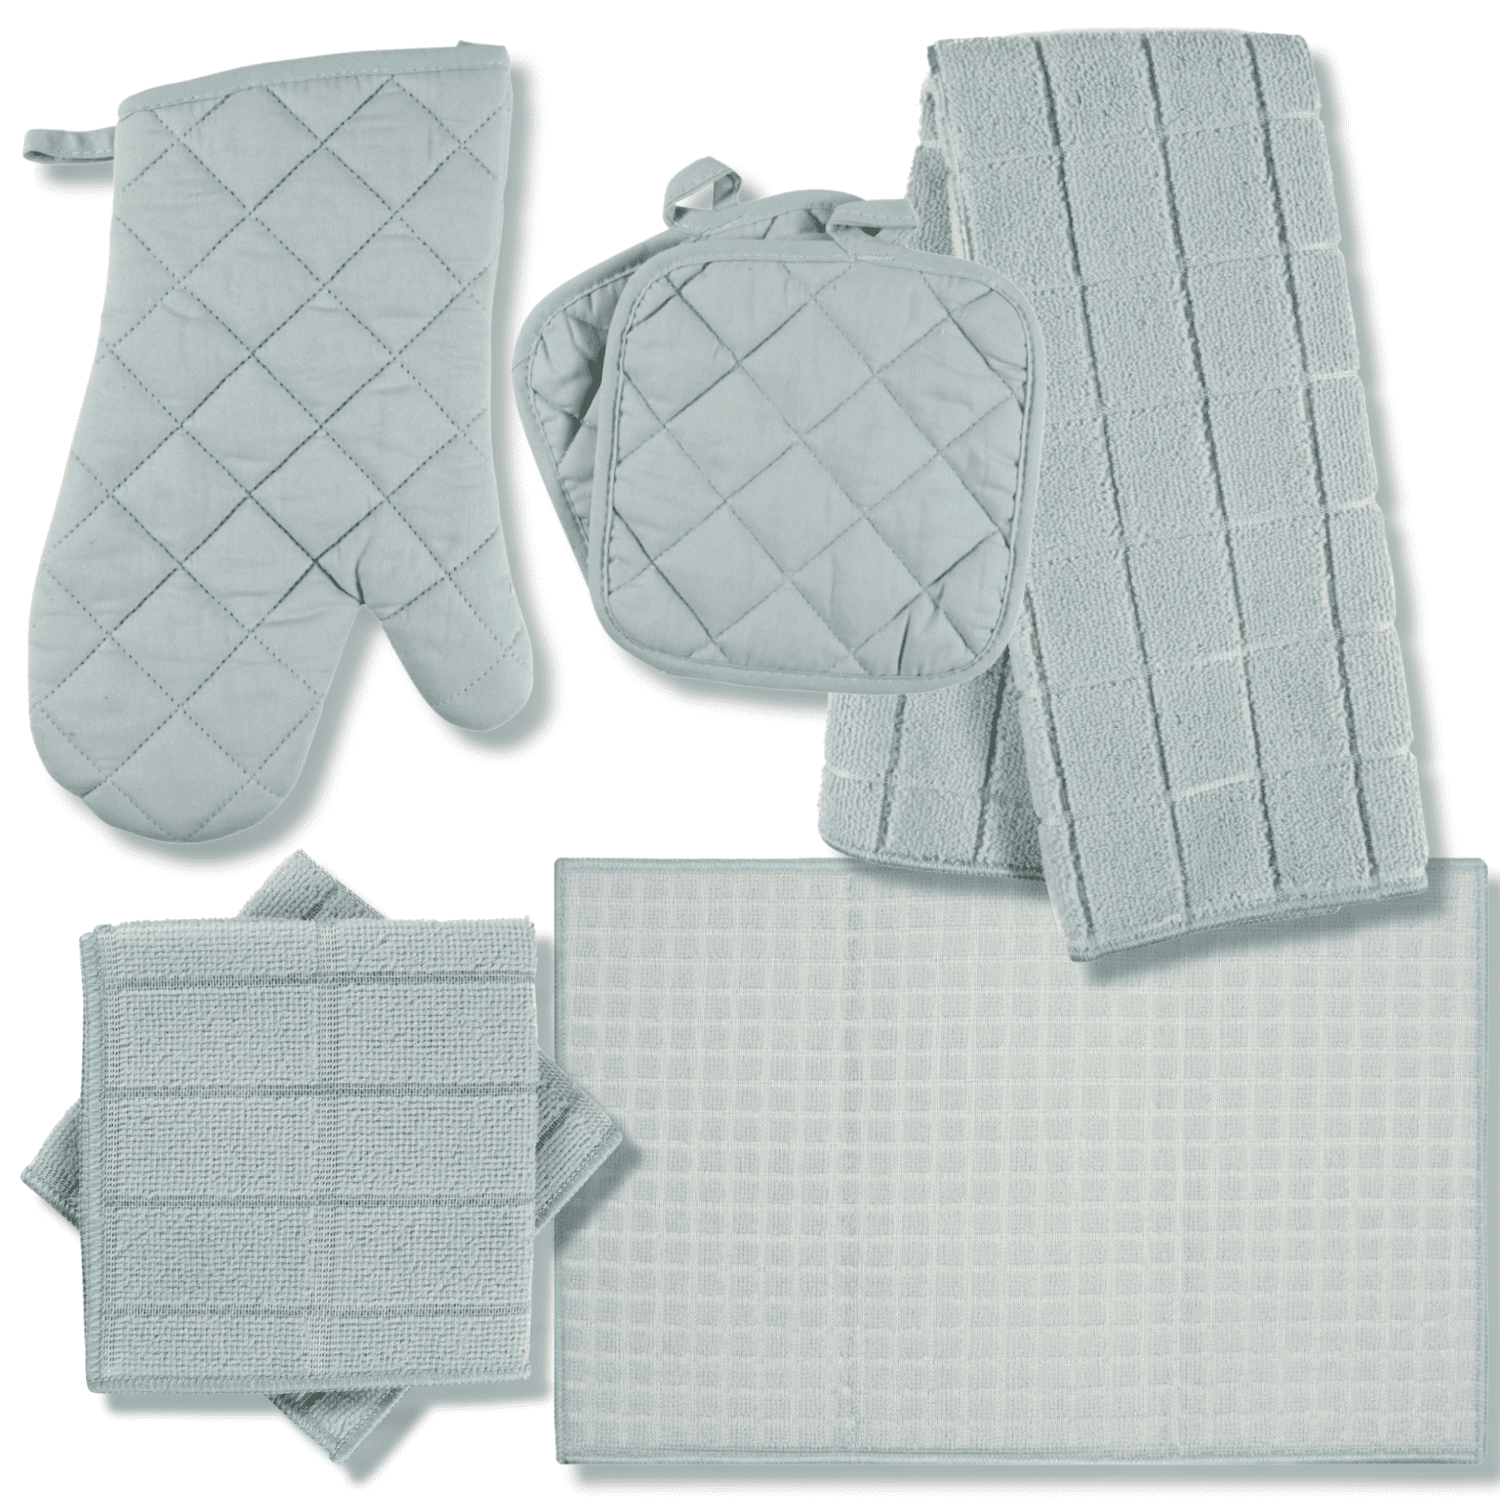 Dish Towel Oven Mitt Dish Drying Kitchen Towel Set with 2 Quilted Pot Holders 